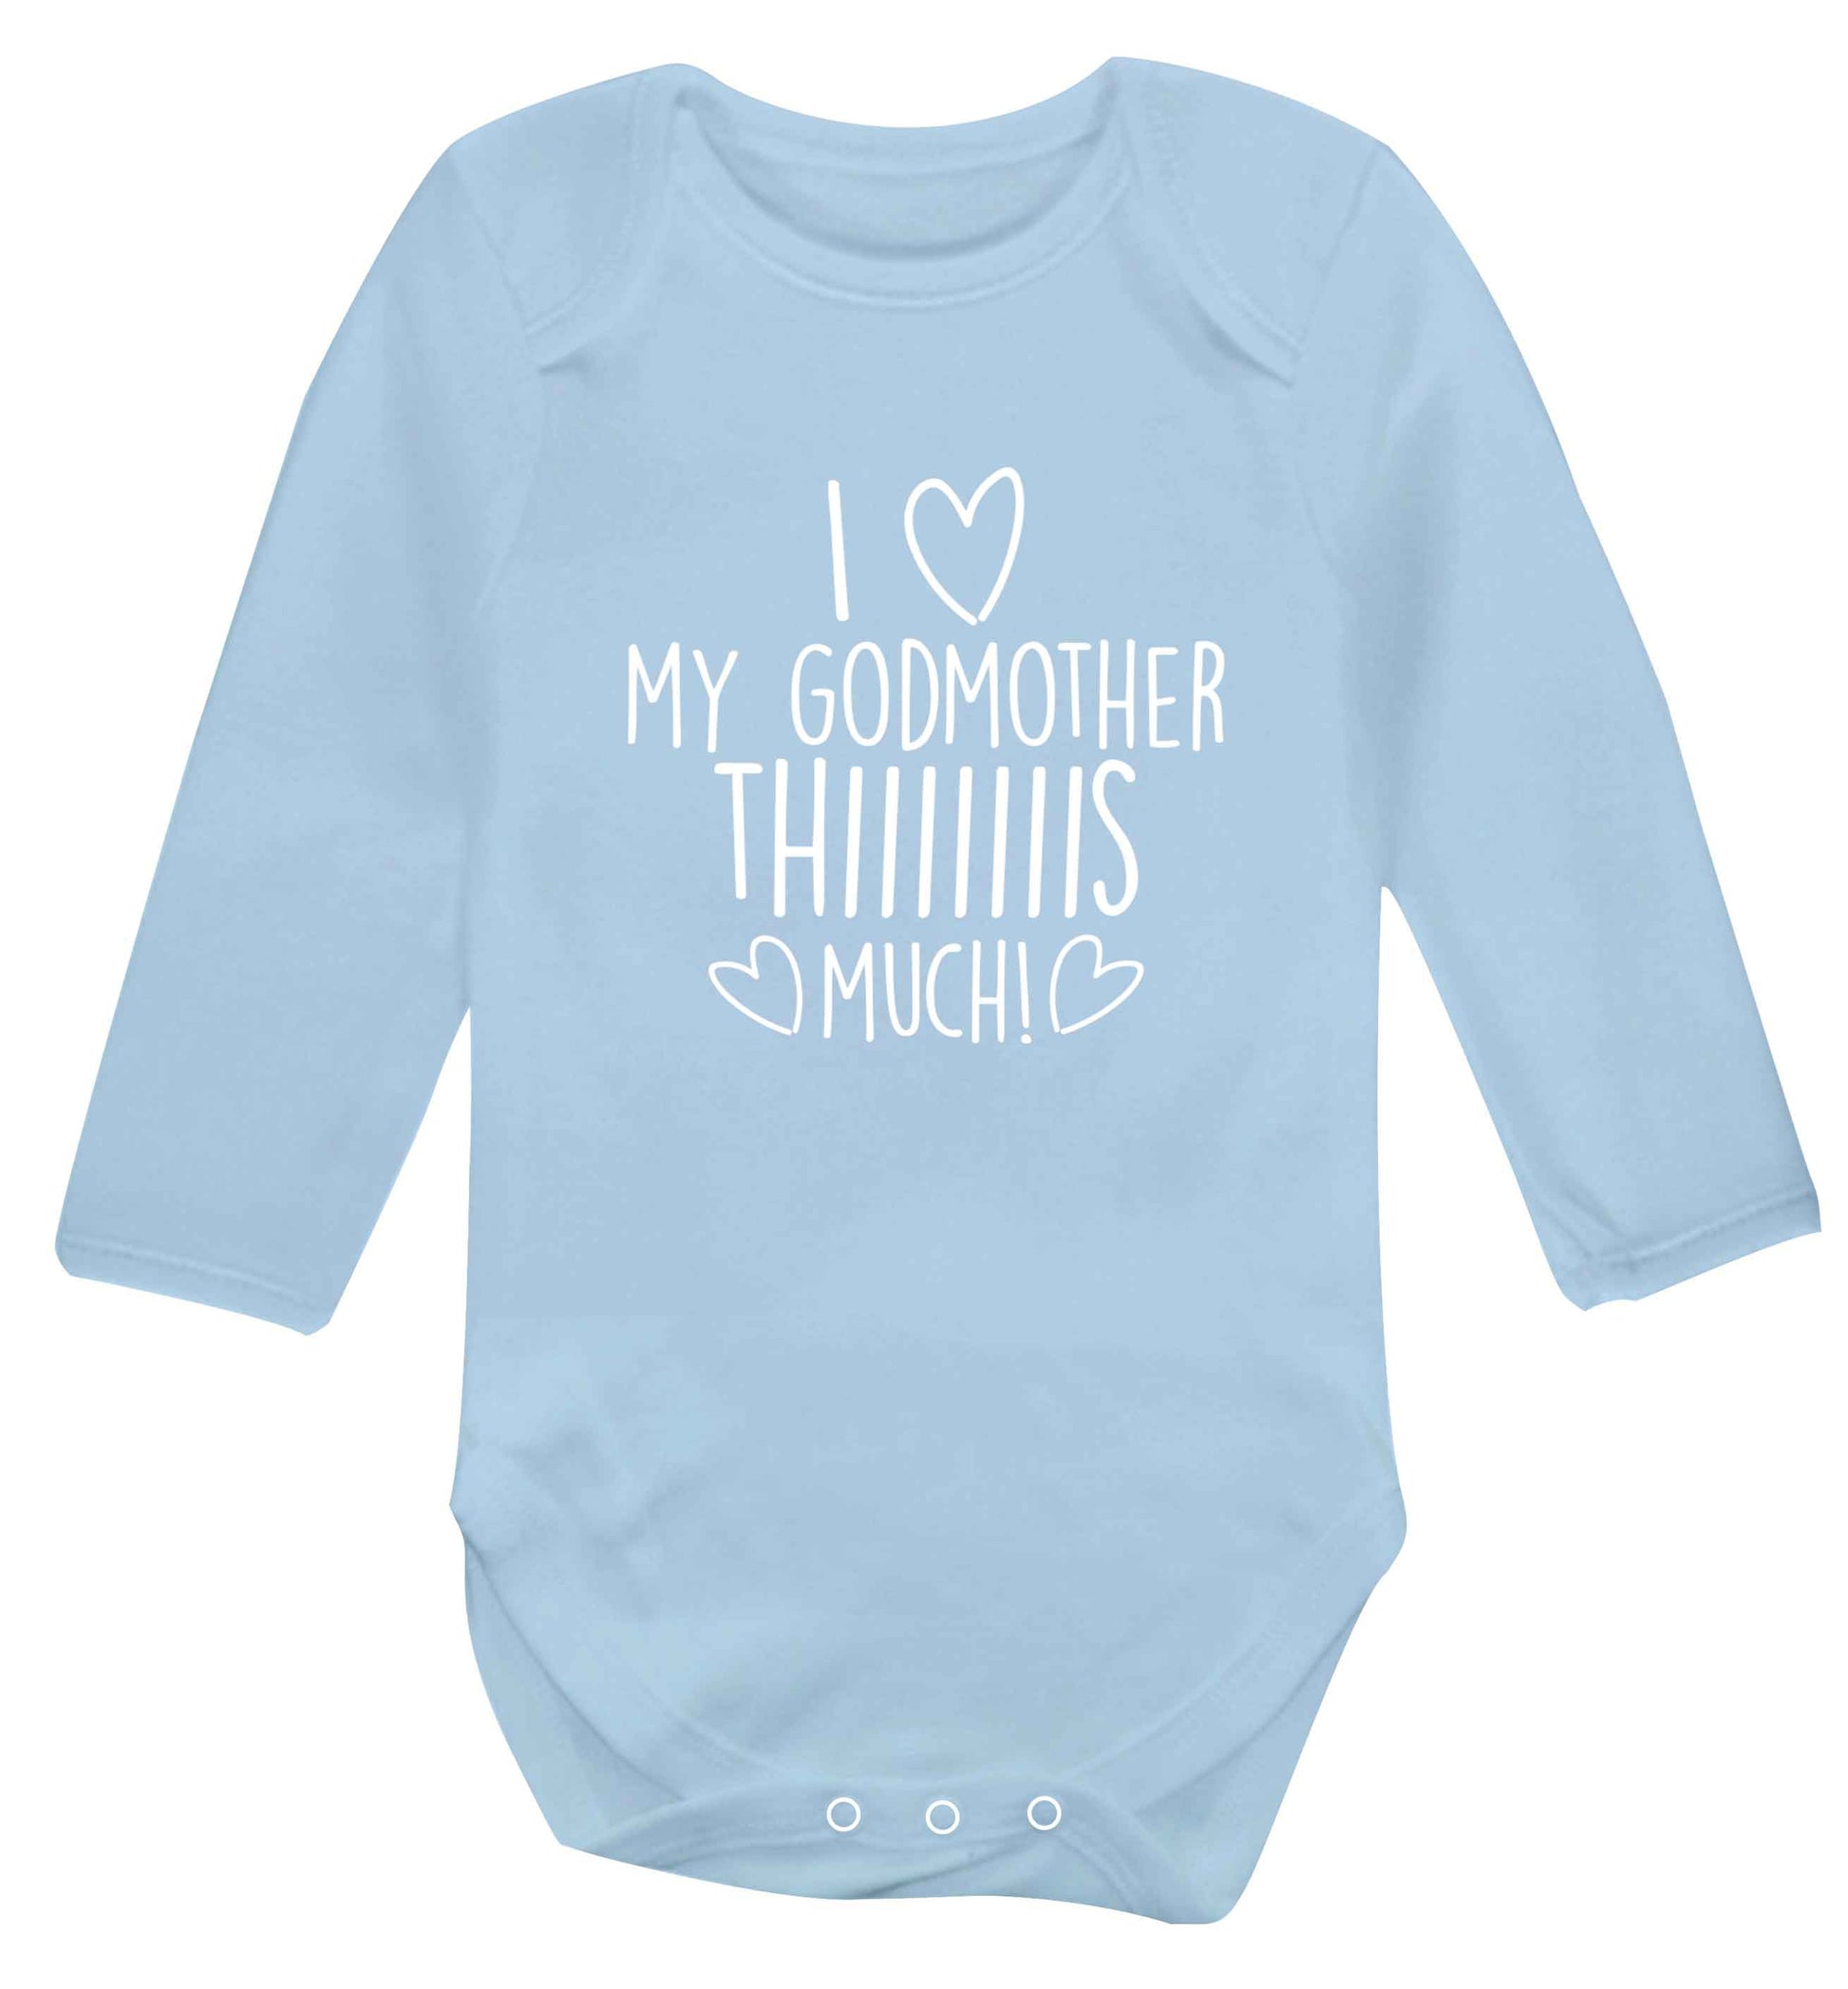 I love my Godmother this much baby vest long sleeved pale blue 6-12 months